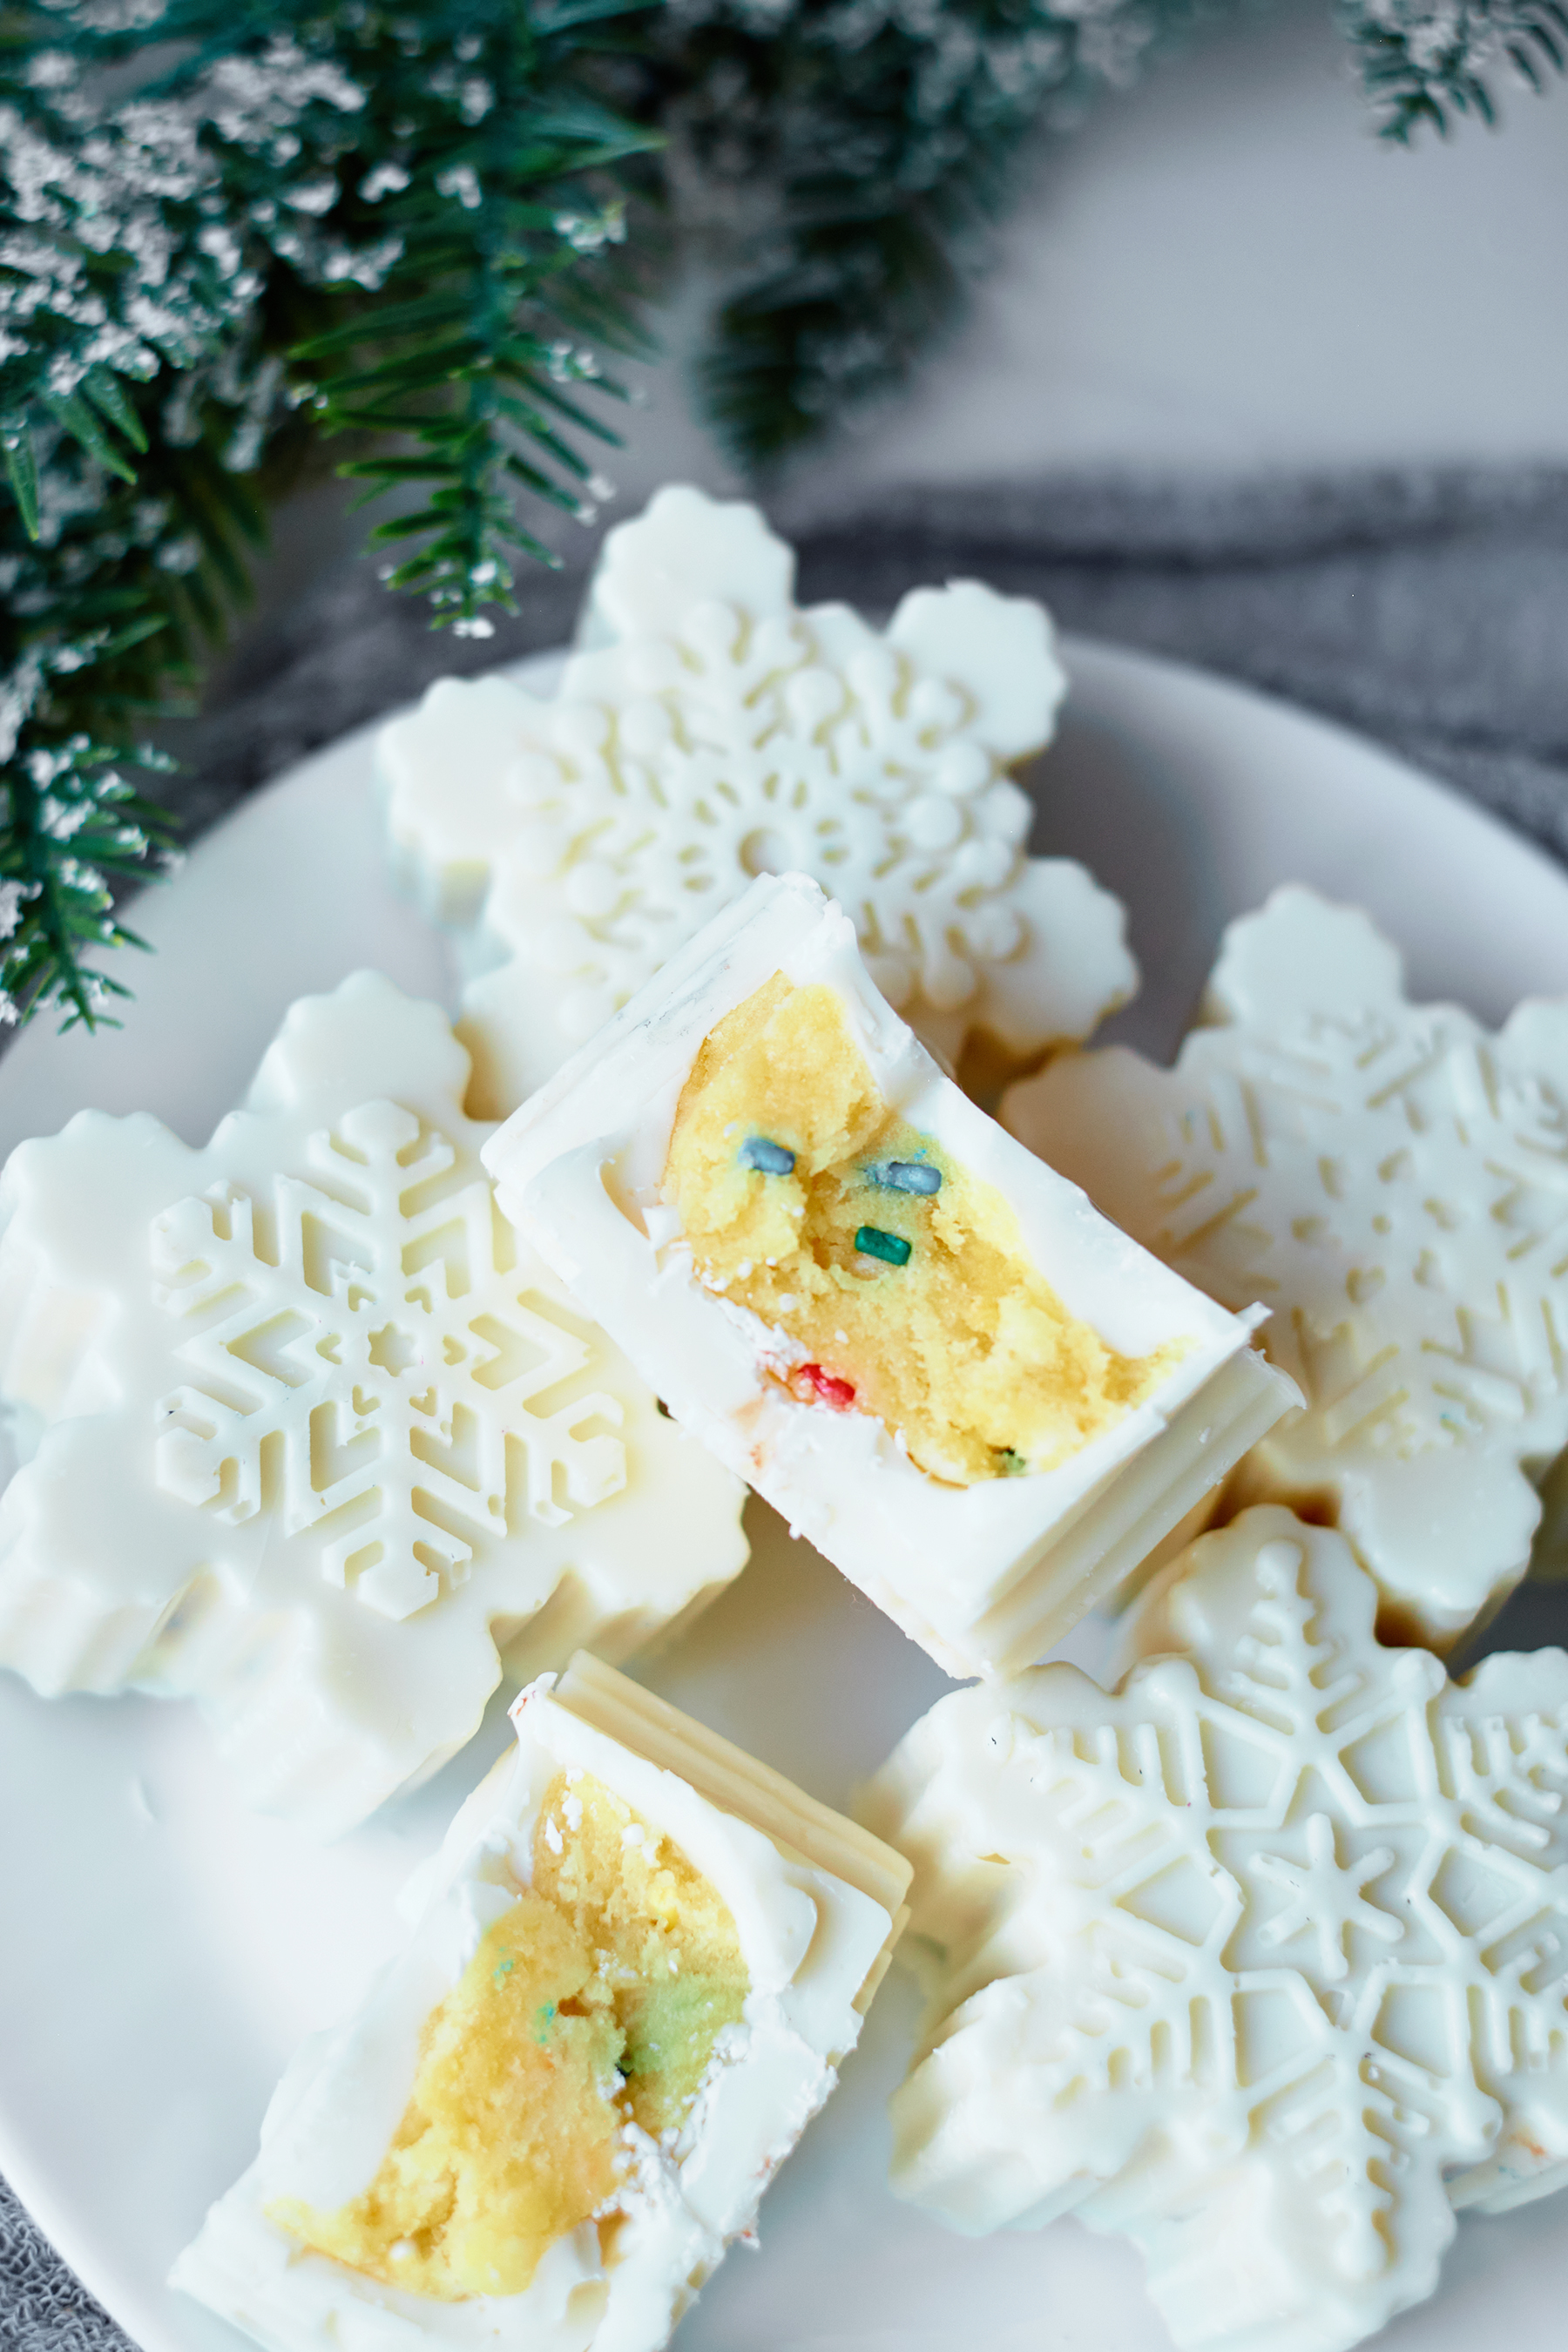 Mold Baking Mould Cook Christmas Snowflake Pattern Silicone Mold Chocolate Cake 